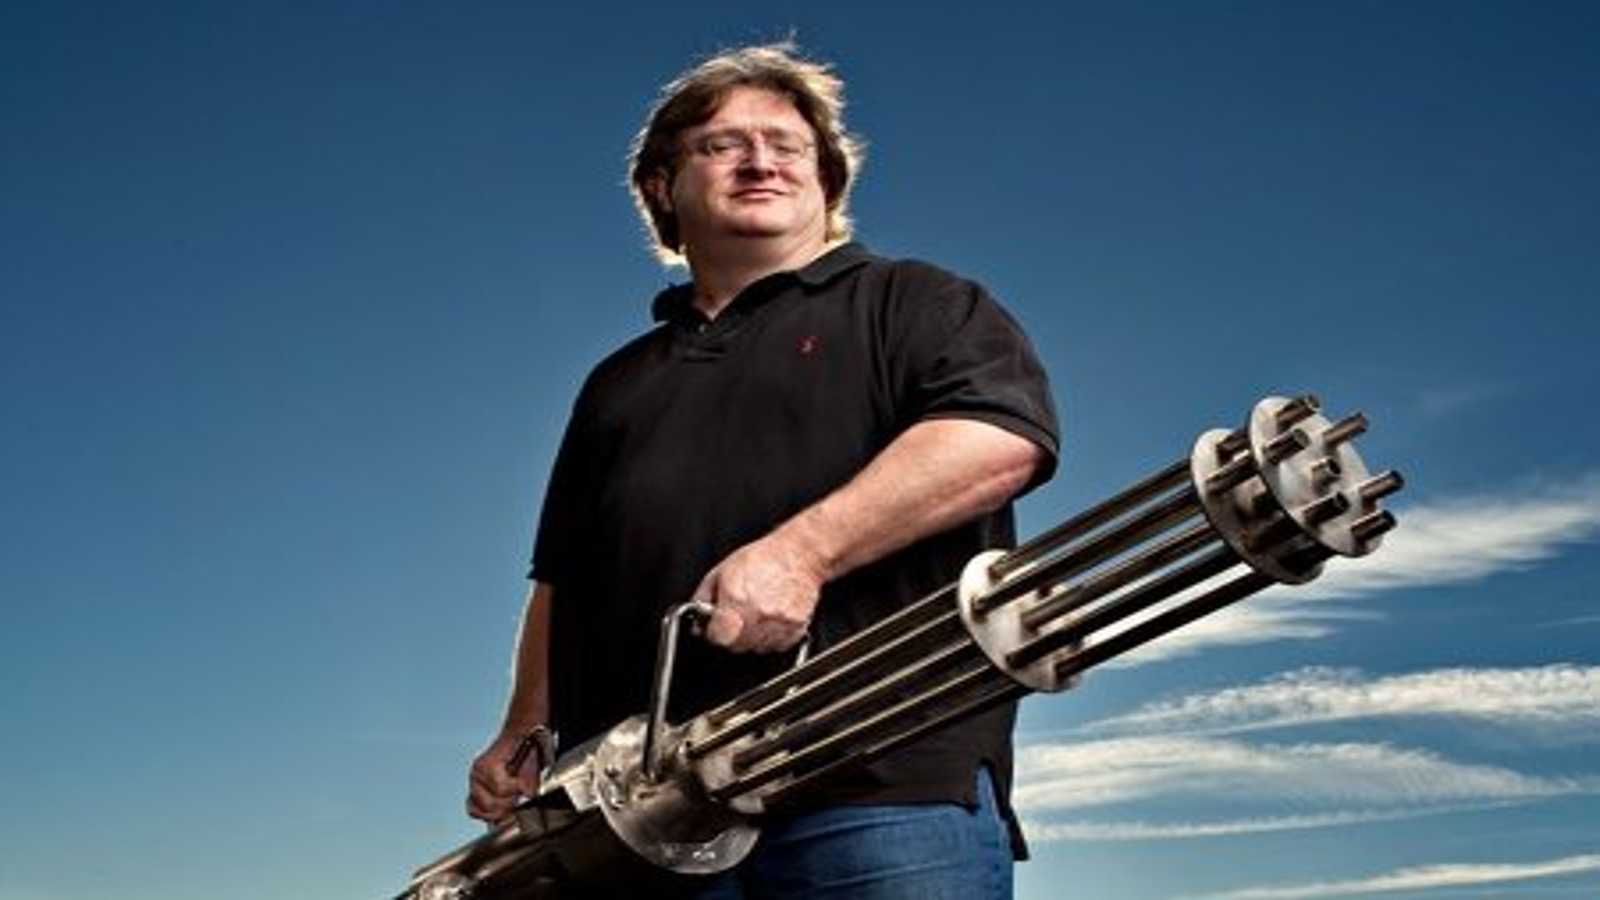 Gabe Newell's Net Worth - How Rich is He?